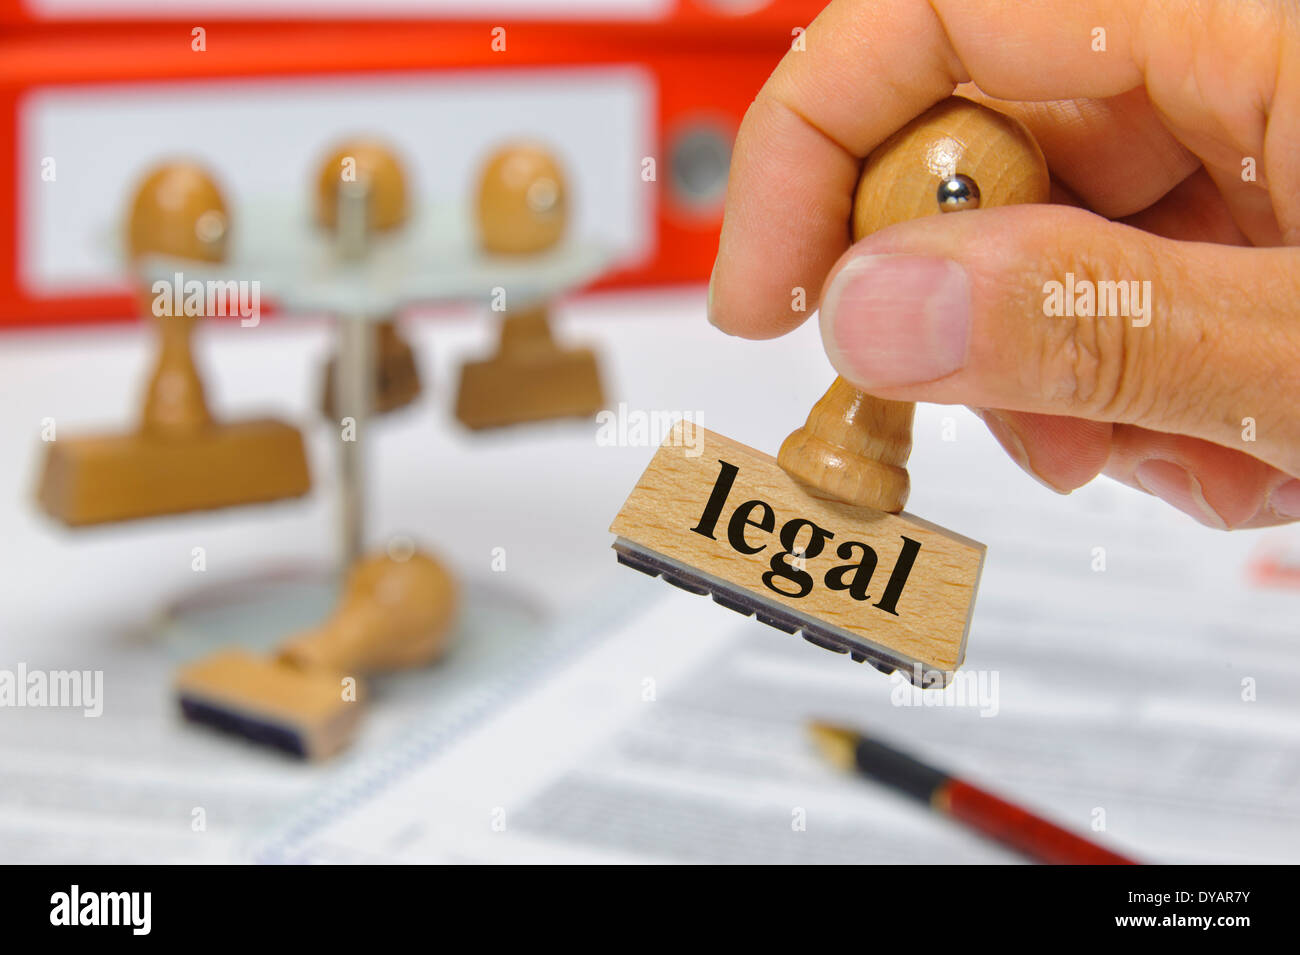 legal marked on rubber stamp in hand Stock Photo